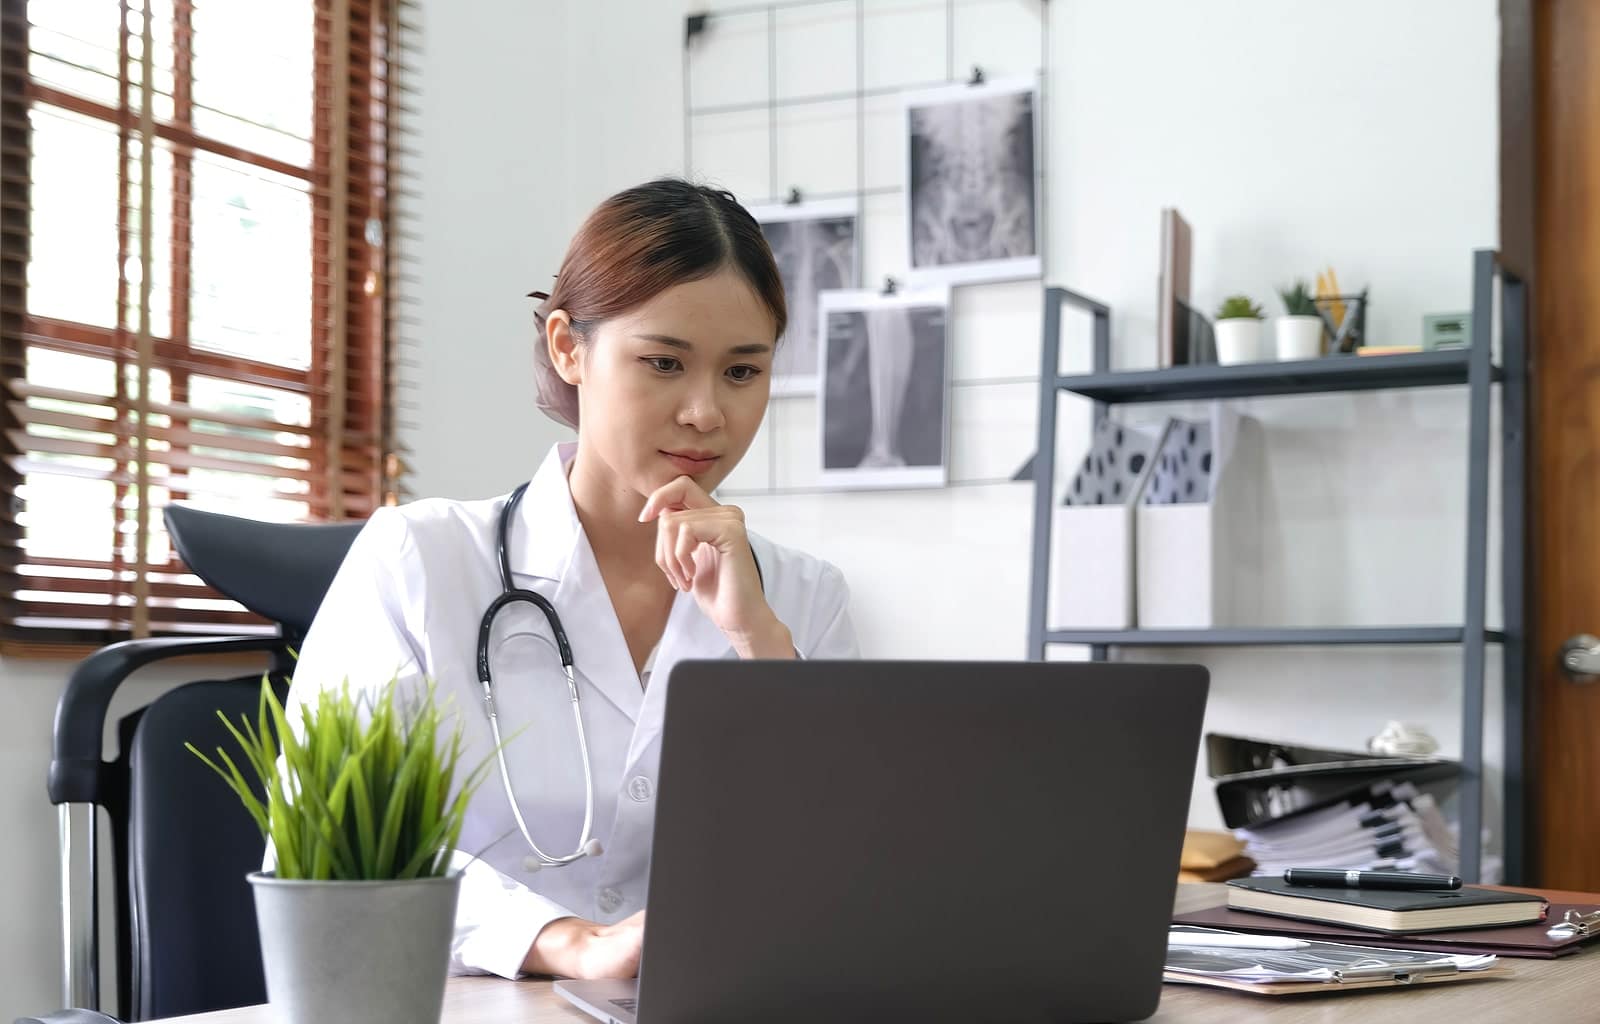 Image of a doctor working on a laptop on Dragonfly Digital Marketing's website